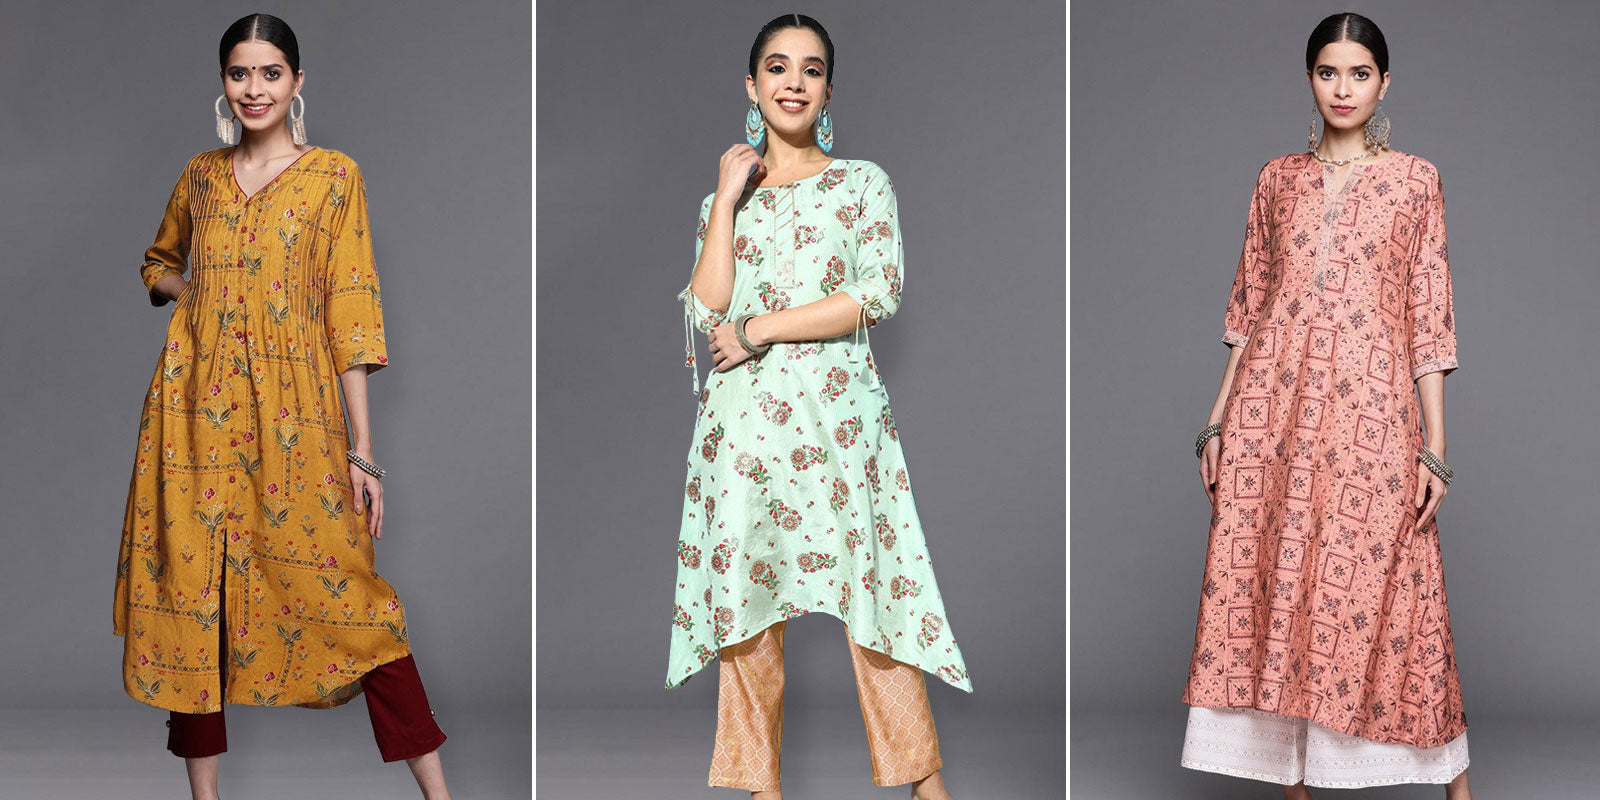 HOW TO STYLE A LOOSE KURTI WITH RIGHT ACCESSORIES